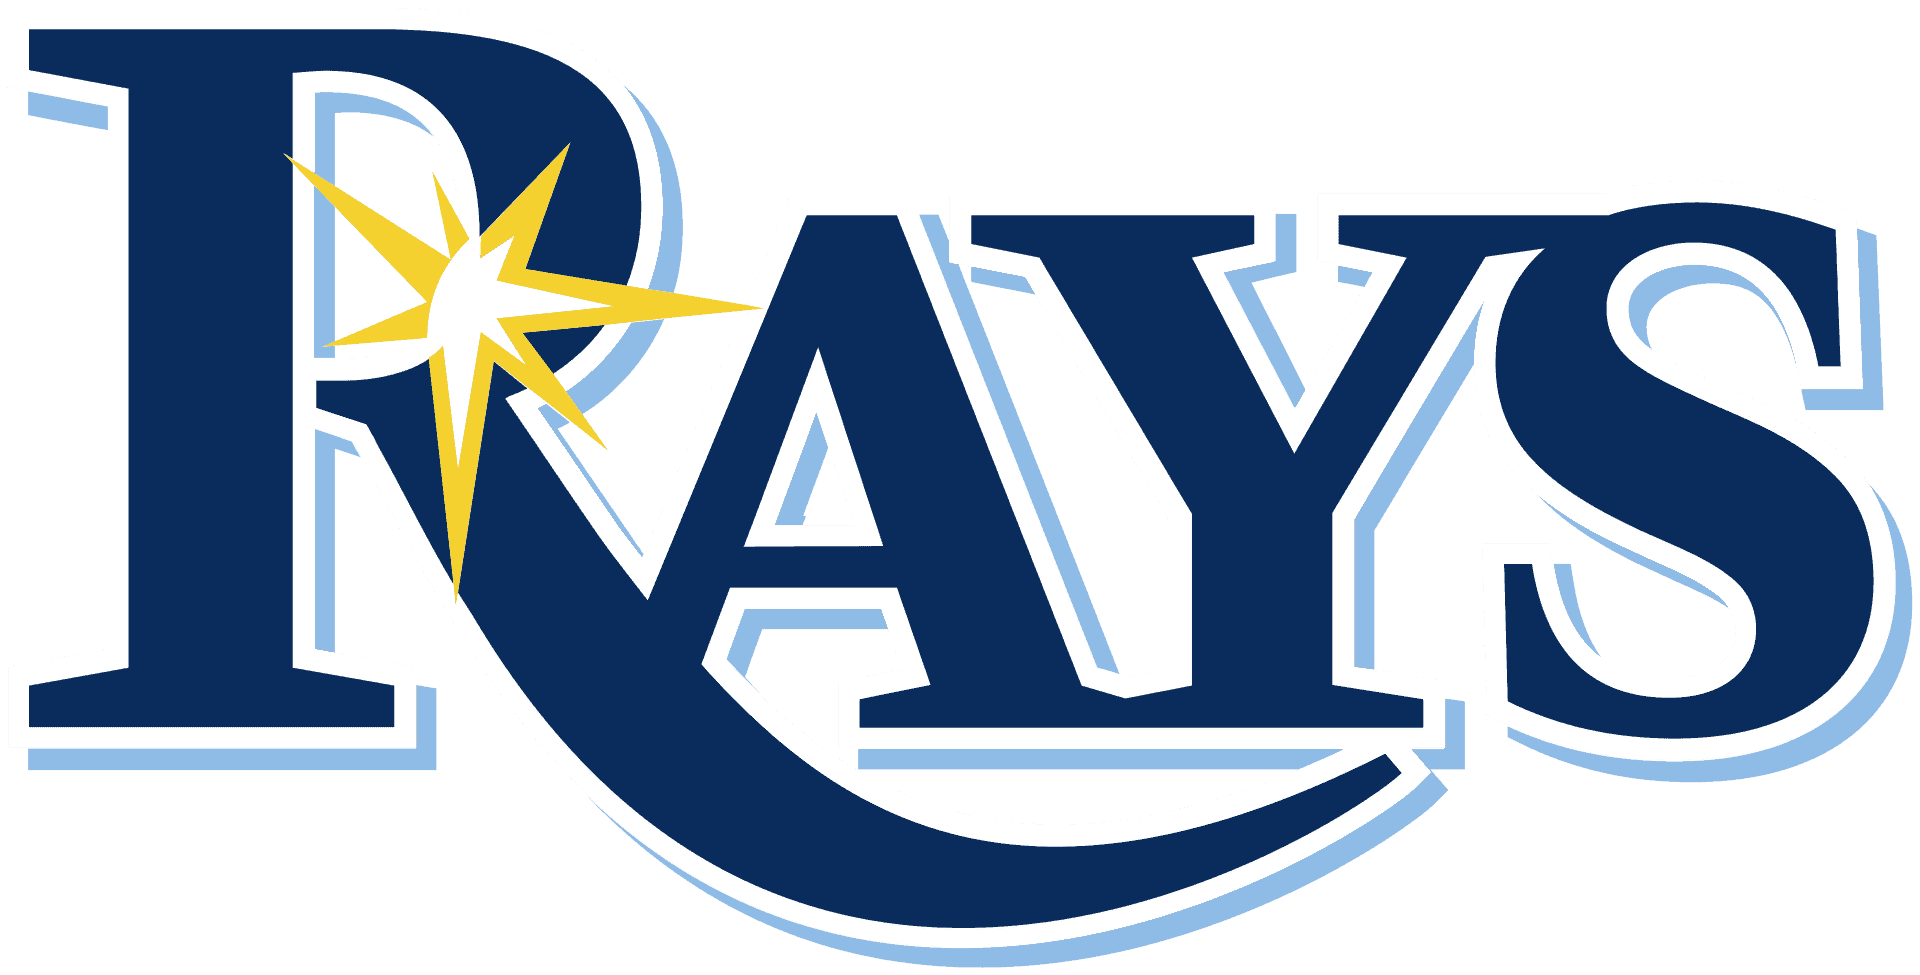 legally betting on the Tampa Bay Rays odds to win